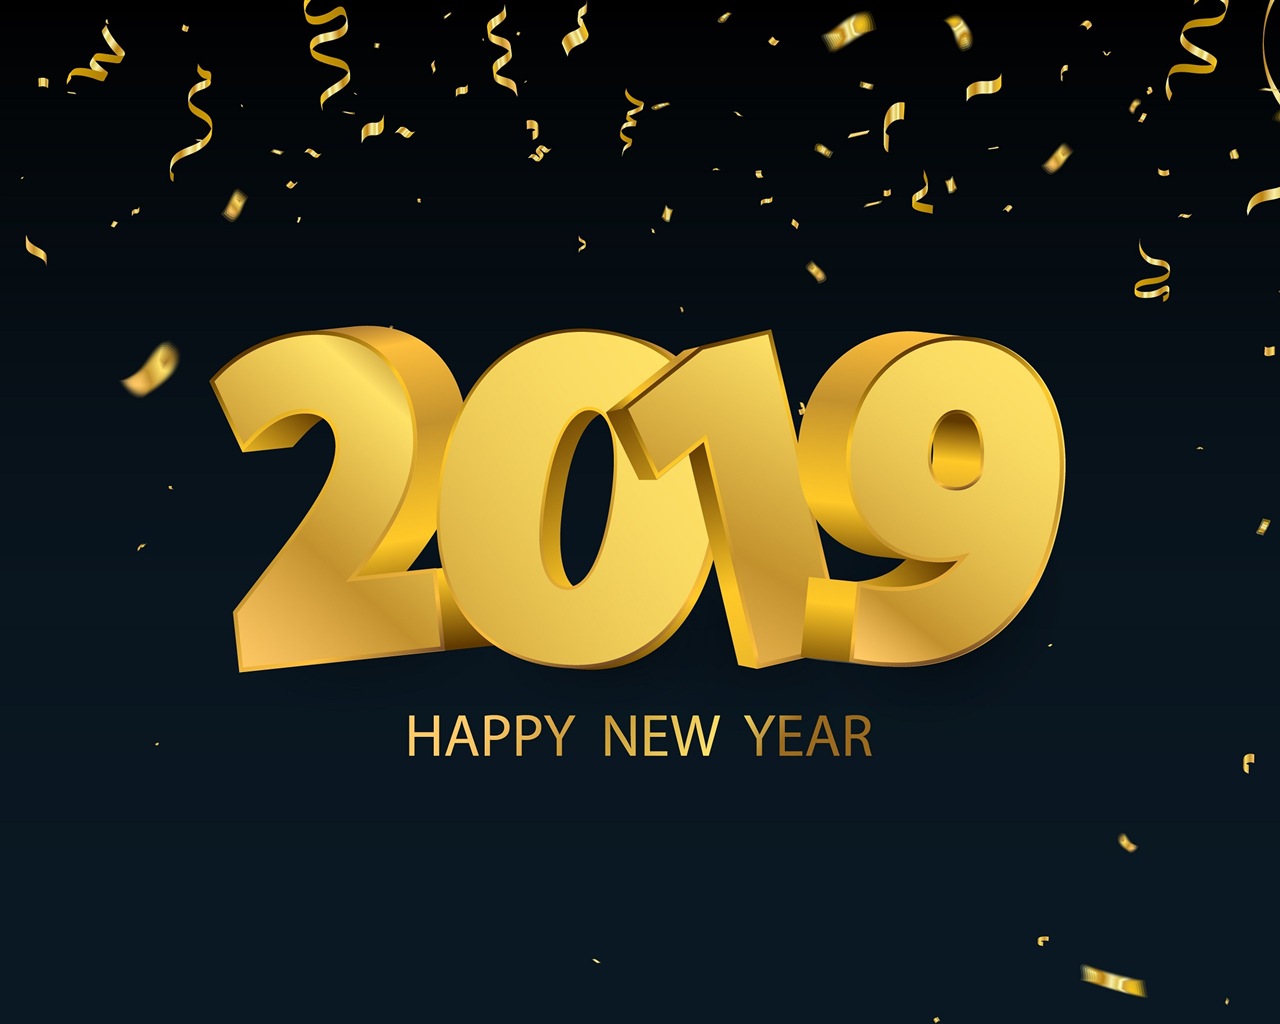 Happy New Year 2019 HD wallpapers #13 - 1280x1024